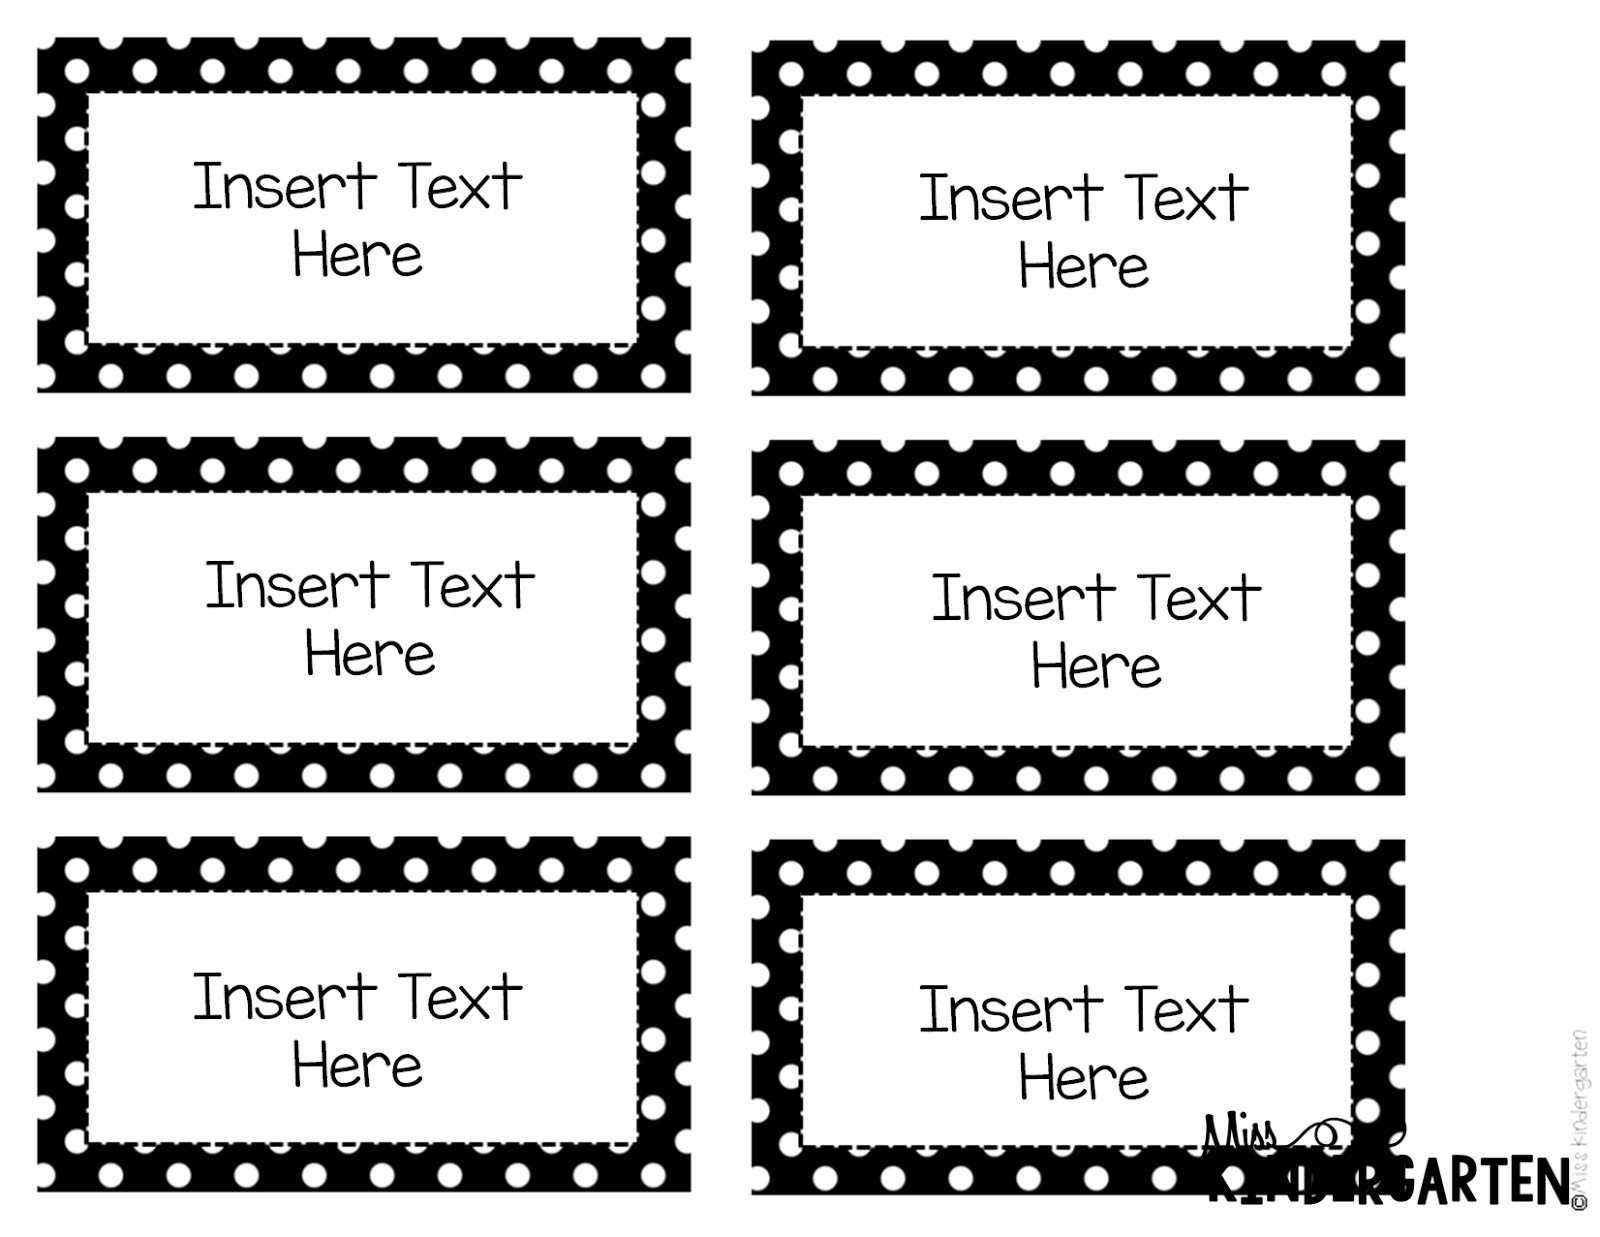 001 Free Printable Labels For Word Top Maker With Intended ~ Ulyssesroom - Free Printable Label Templates For Word